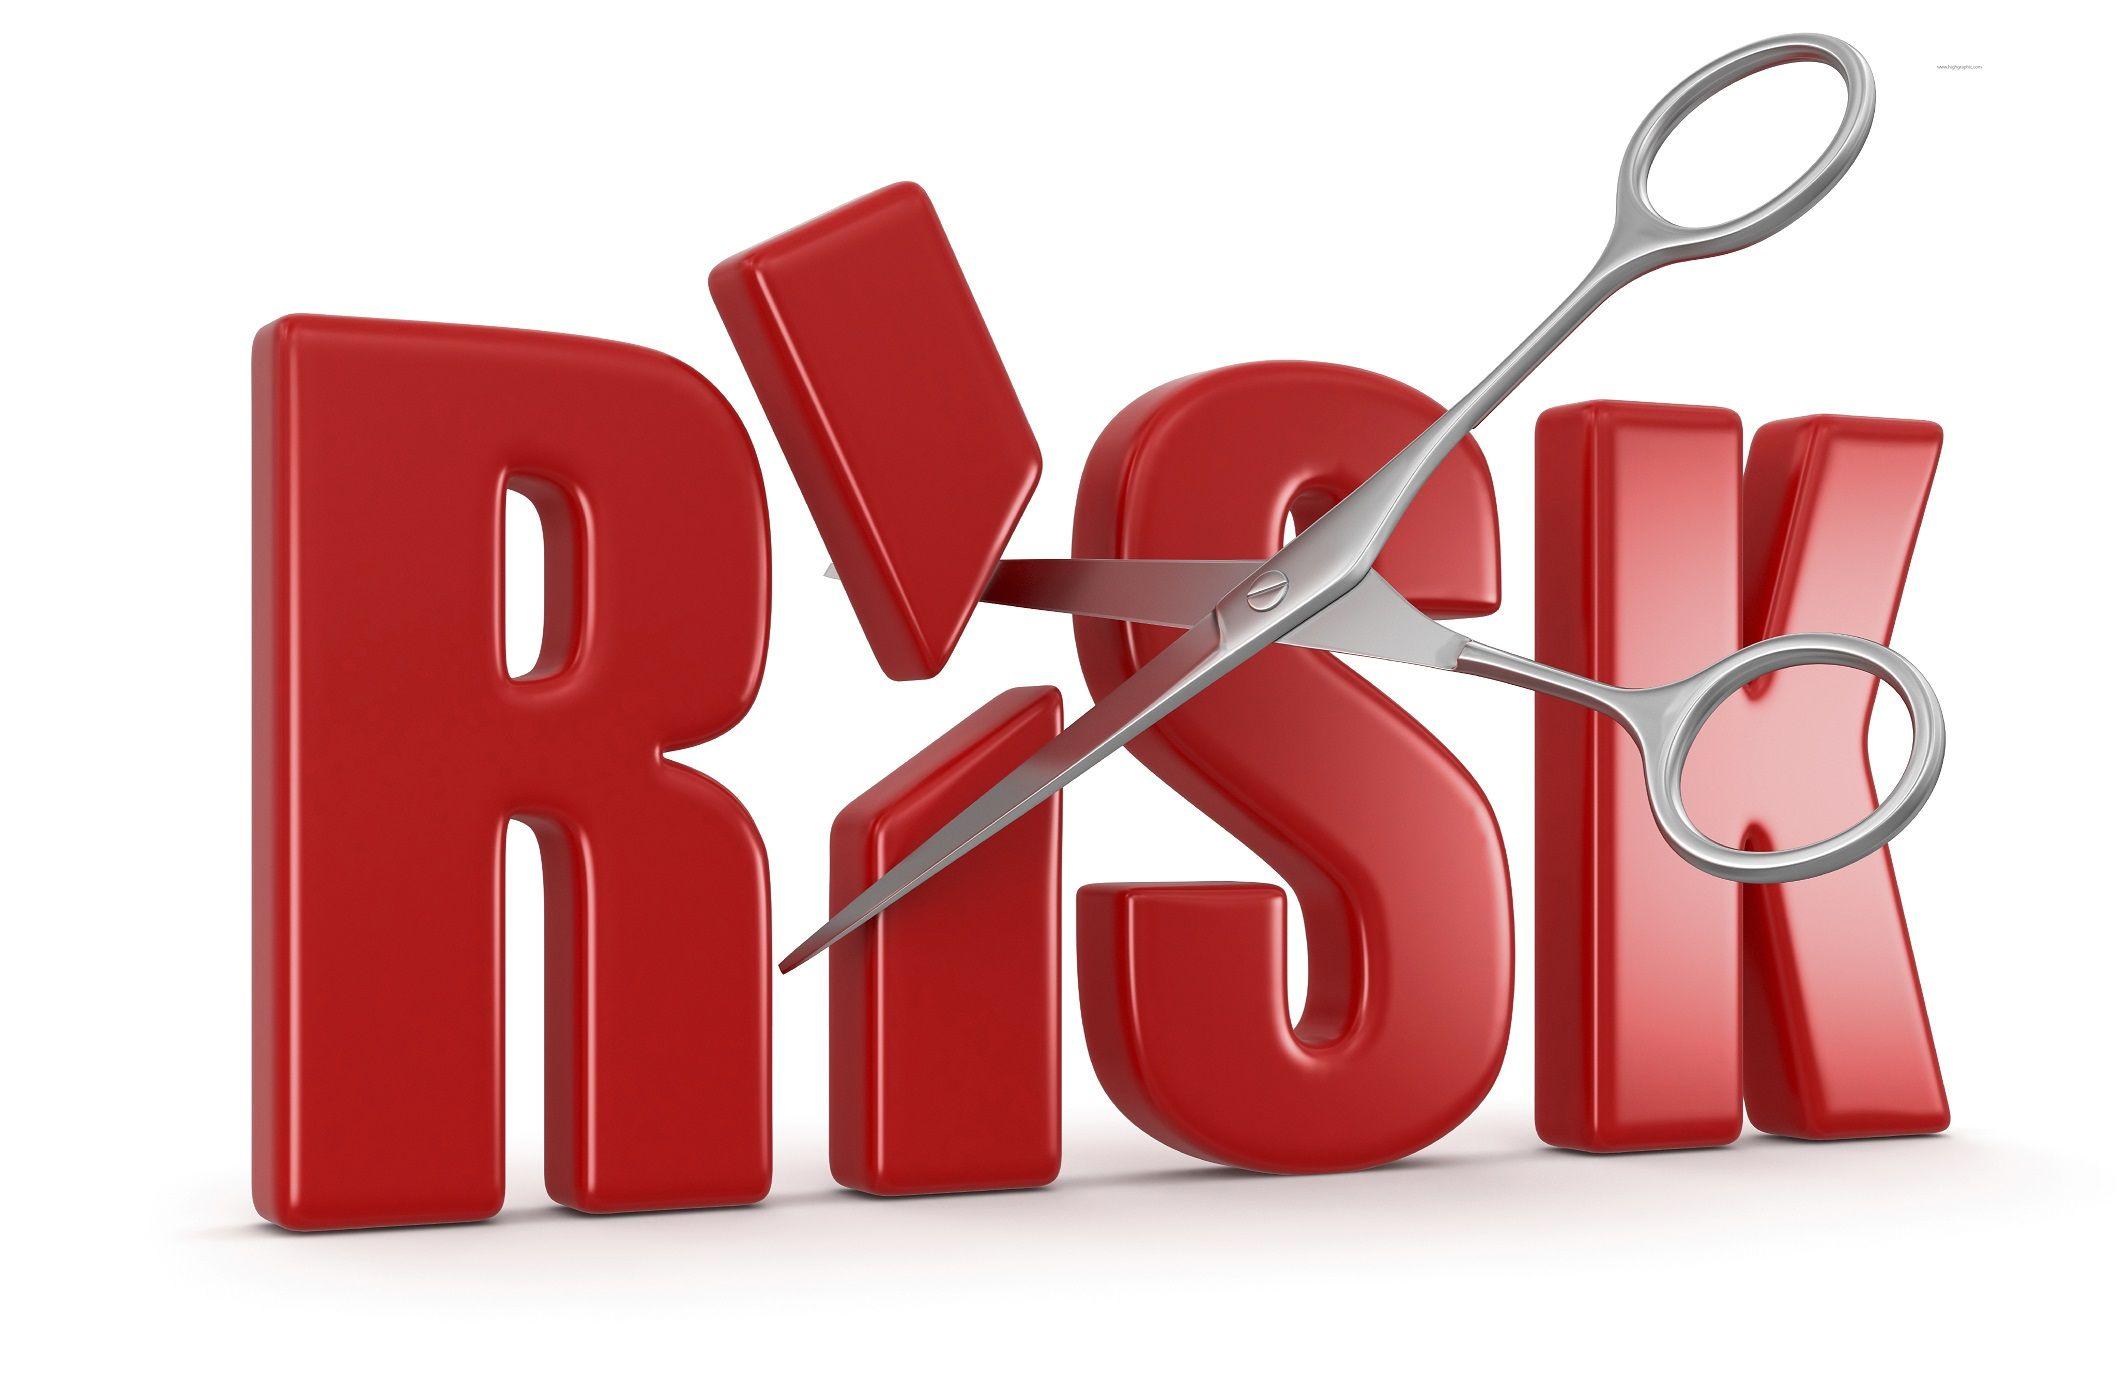 Risk Logo - A Project Manager's Role to Mitigating Project Risk